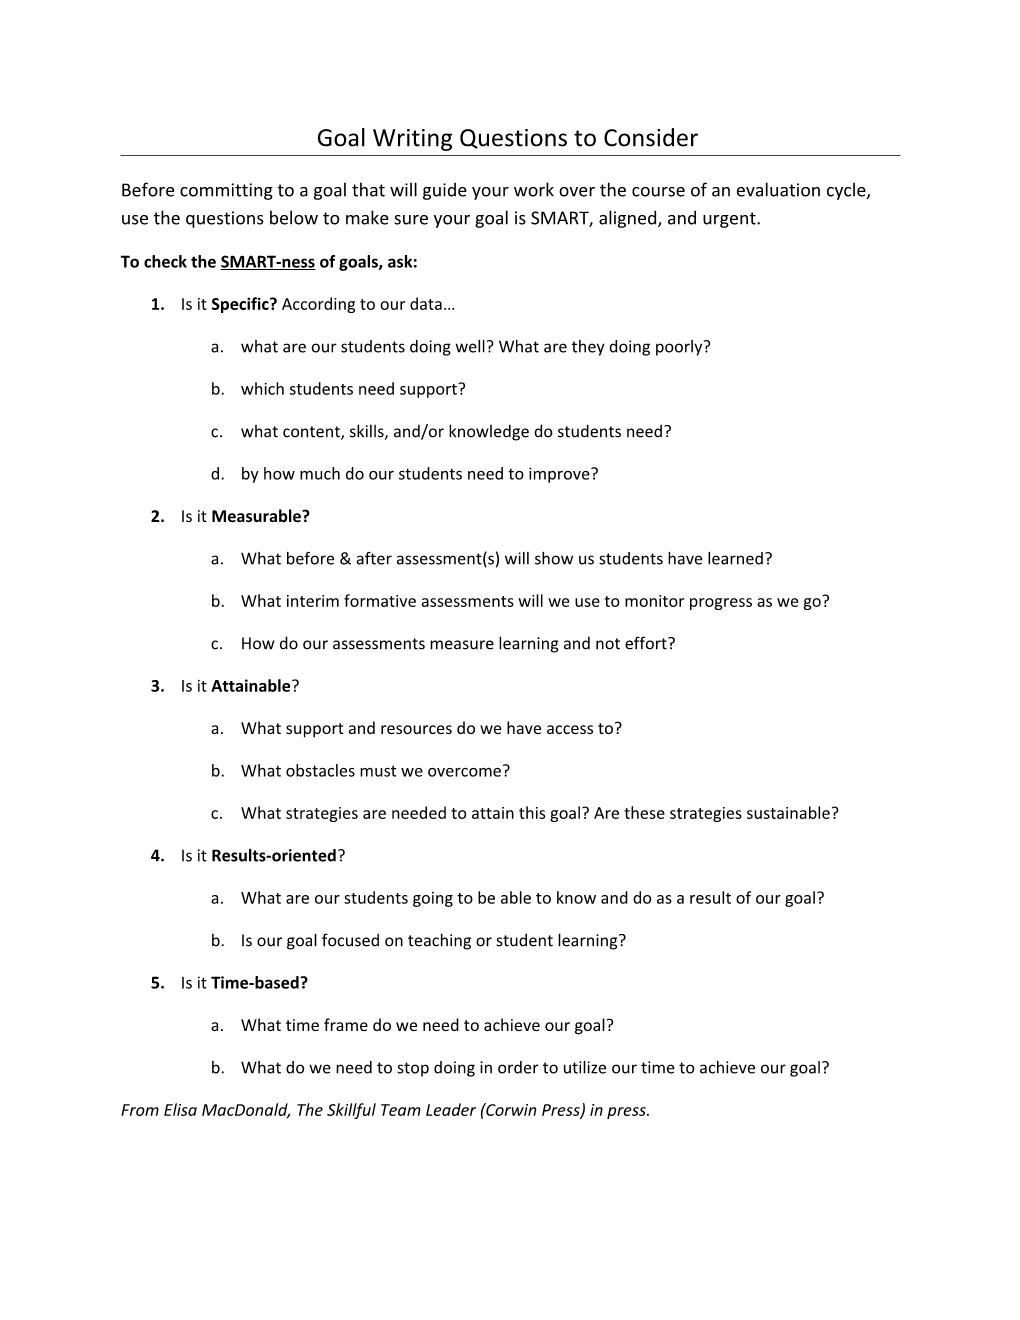 Goal Writing Questions to Consider